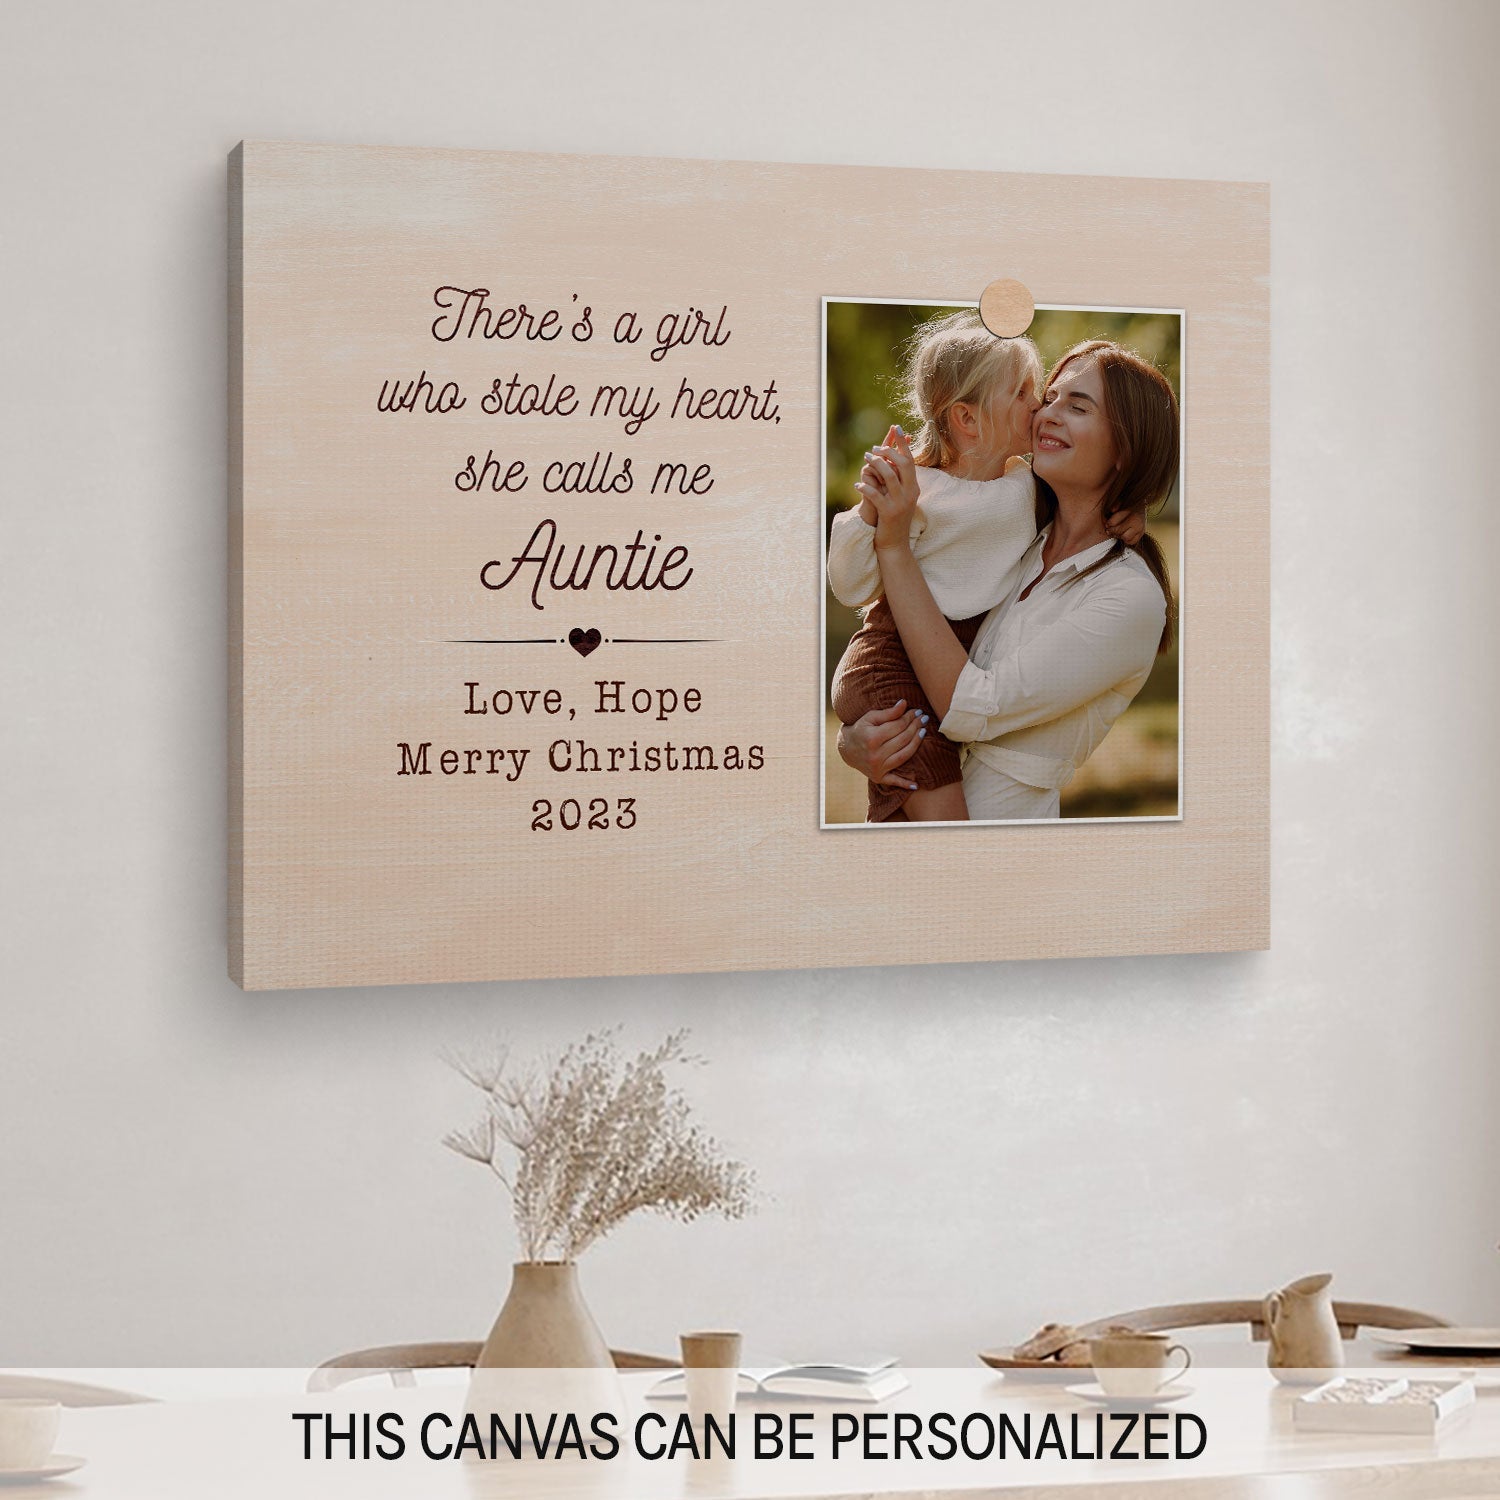 There's A Girl Who Stole My Heart - Personalized Birthday or Christmas gift for Aunt - Custom Canvas Print - MyMindfulGifts